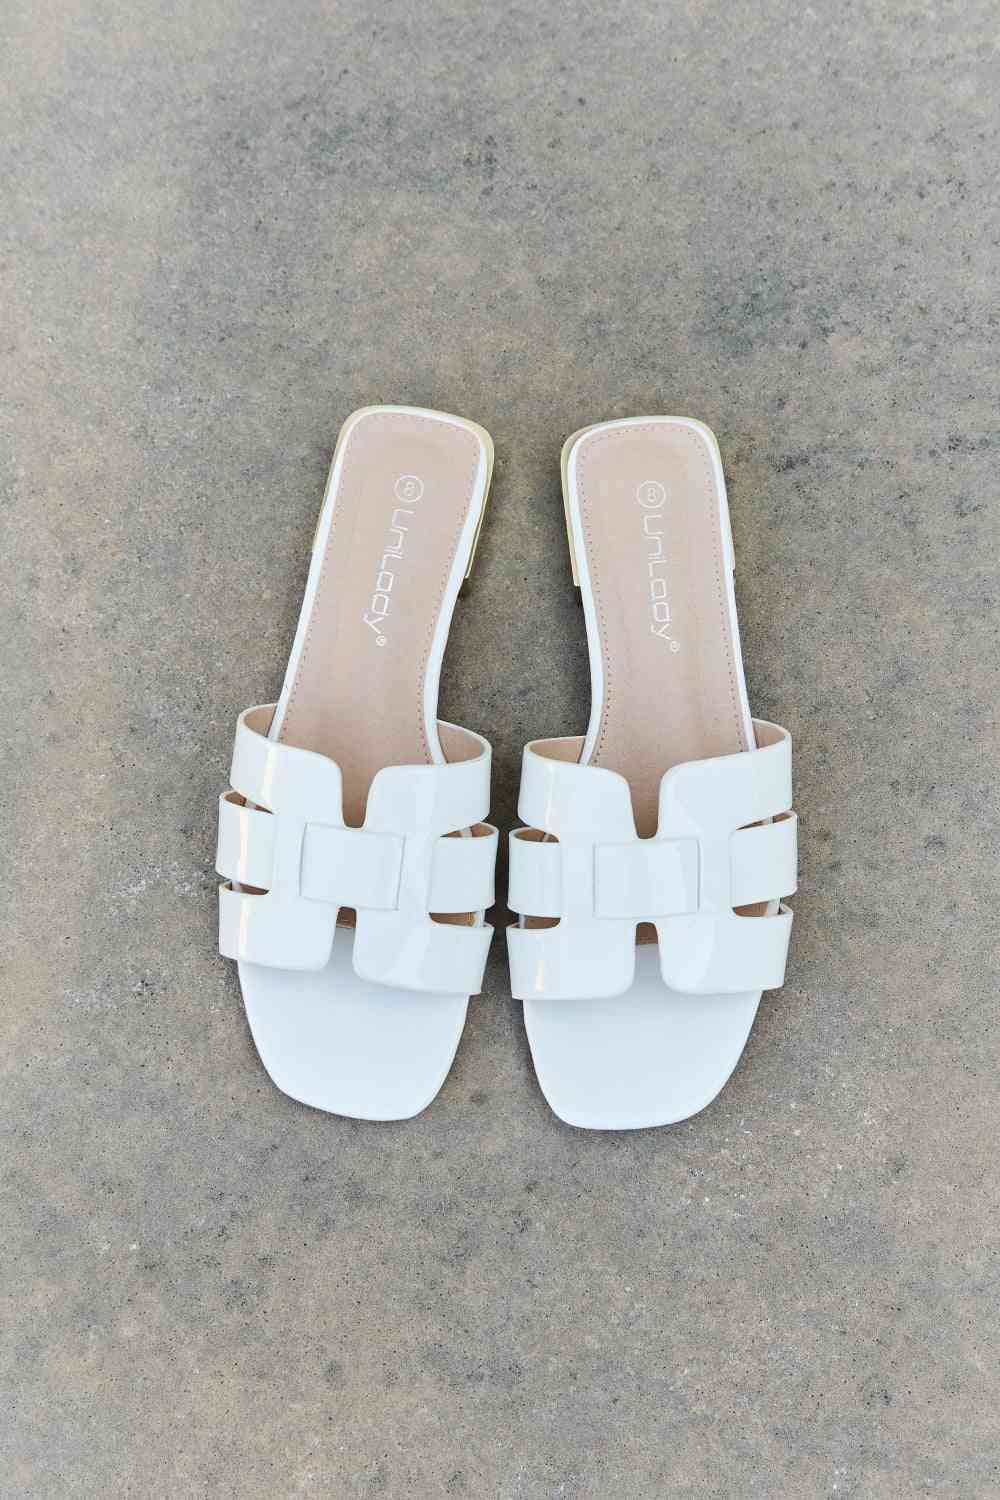 Weeboo Walk It Out Slide Sandals in Icy White | Sugarz Chique Boutique